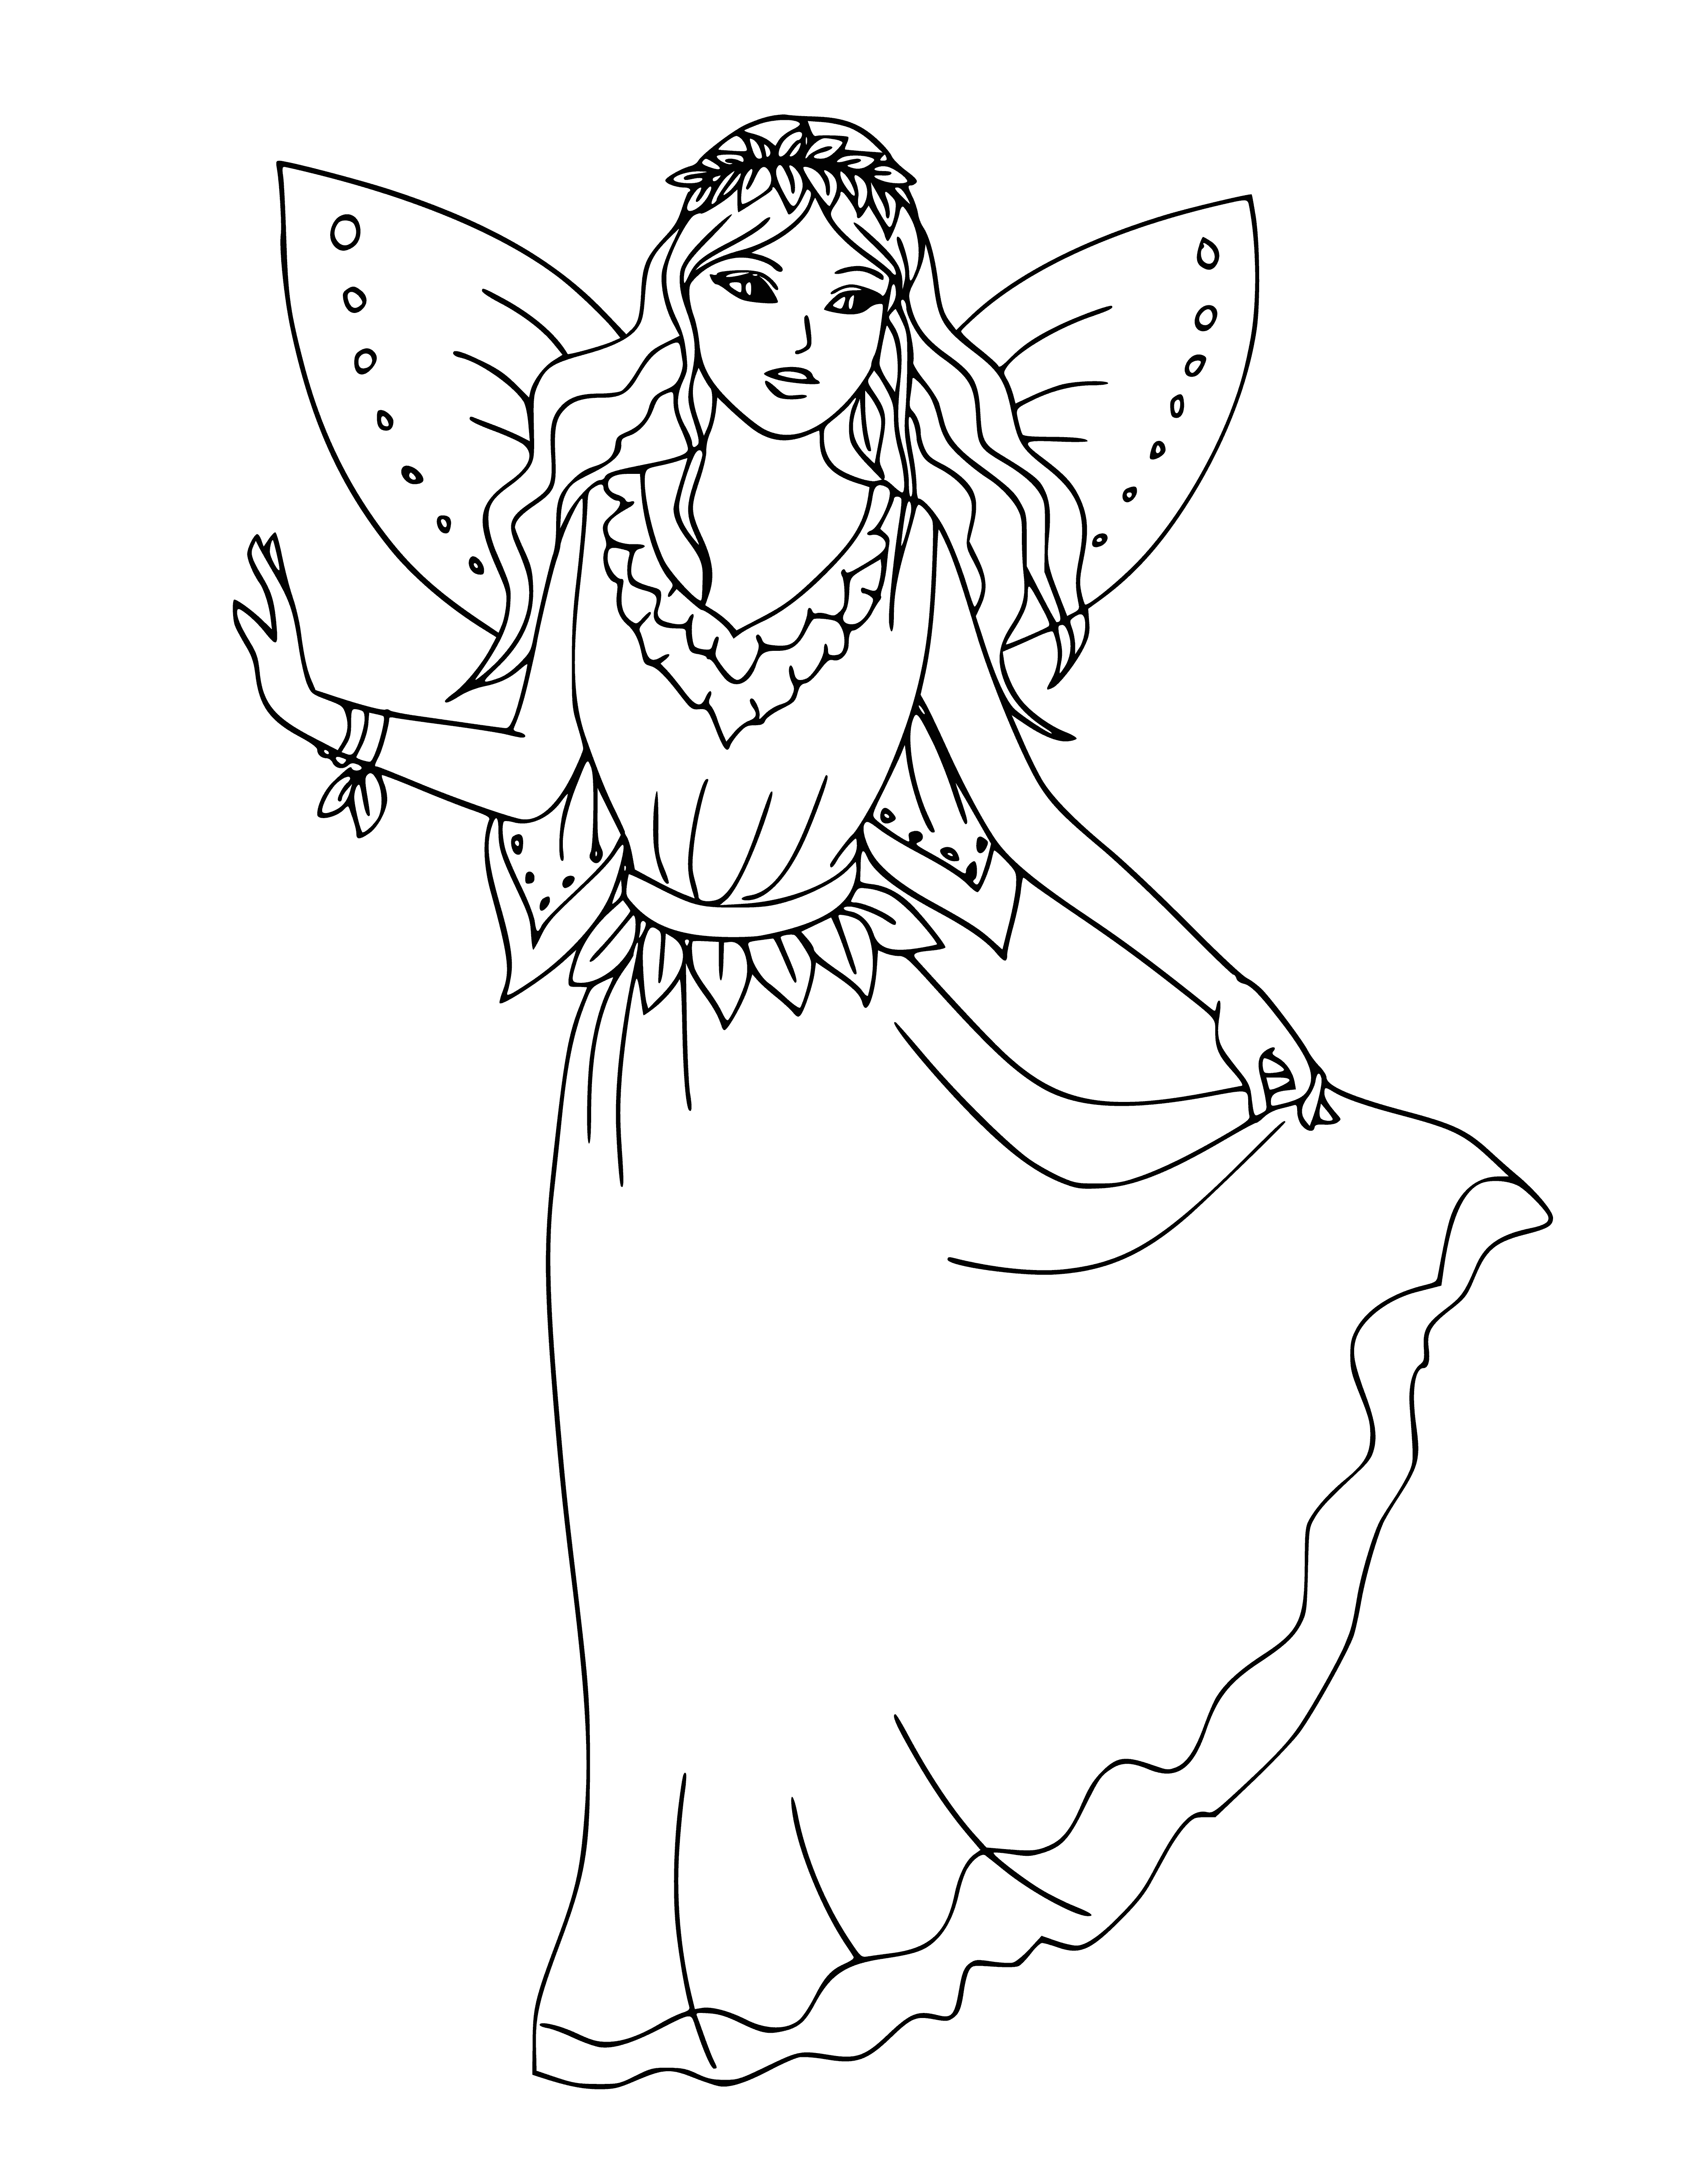 coloring page: Elves and fairies play together in the forest, elf with a brown hat and fairy with a green dress, both happy and enjoying each other's company.